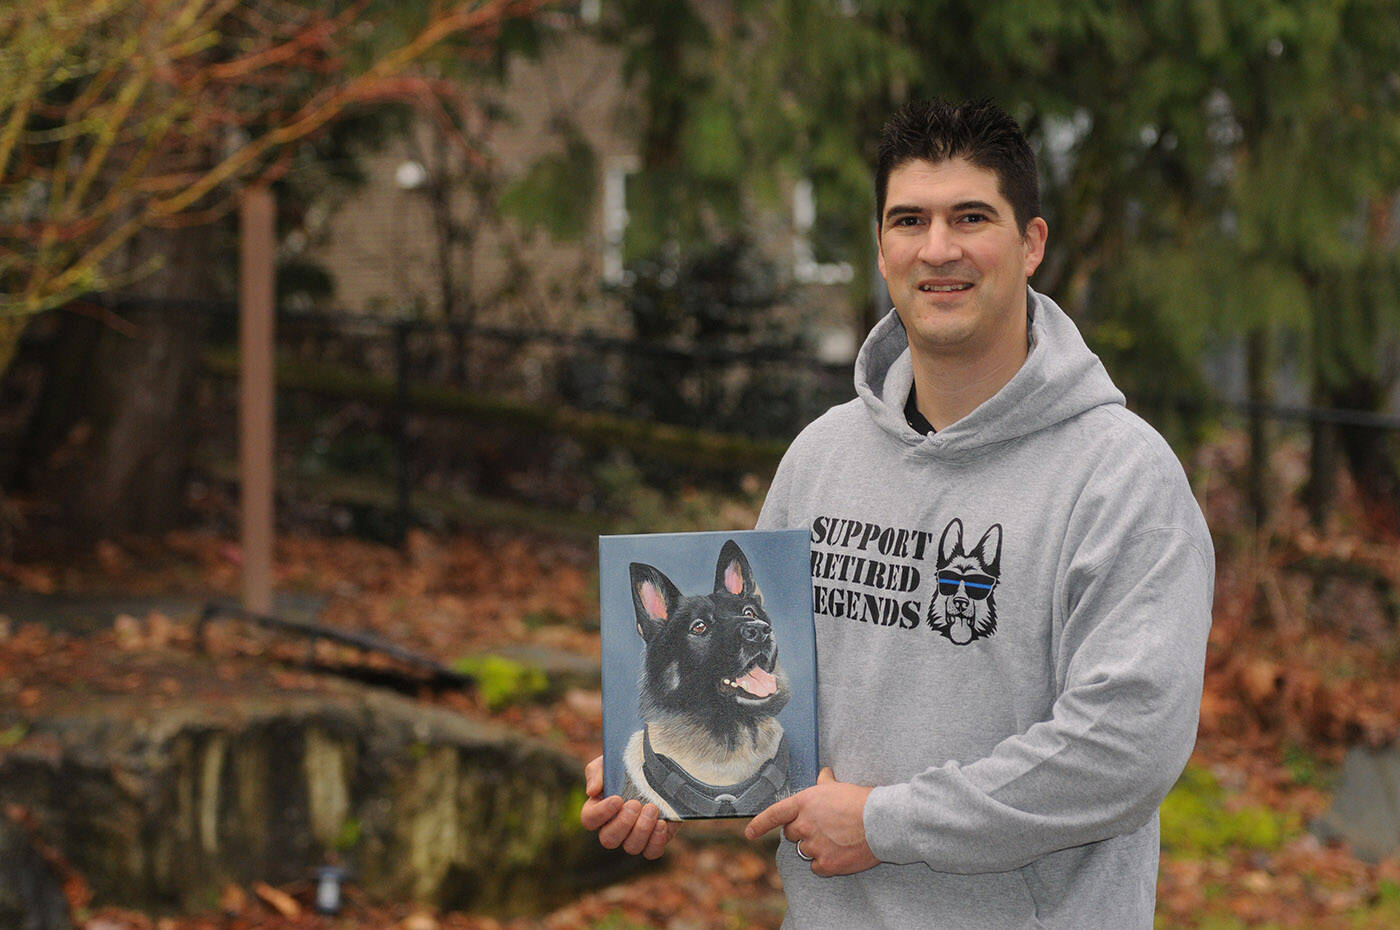 Const. Aaron Courtney hold a portrait of his late police dog Koda at his home in Chilliwack on Feb. 17, 2022. He, along with partner Sgt. Jason Martens and their wives started Support Retired Legends, a business which raises money for a charity called Ned’s Wish which provides financial support to help pay for the medical bills of retired service dogs. (Jenna Hauck/ Chilliwack Progress)